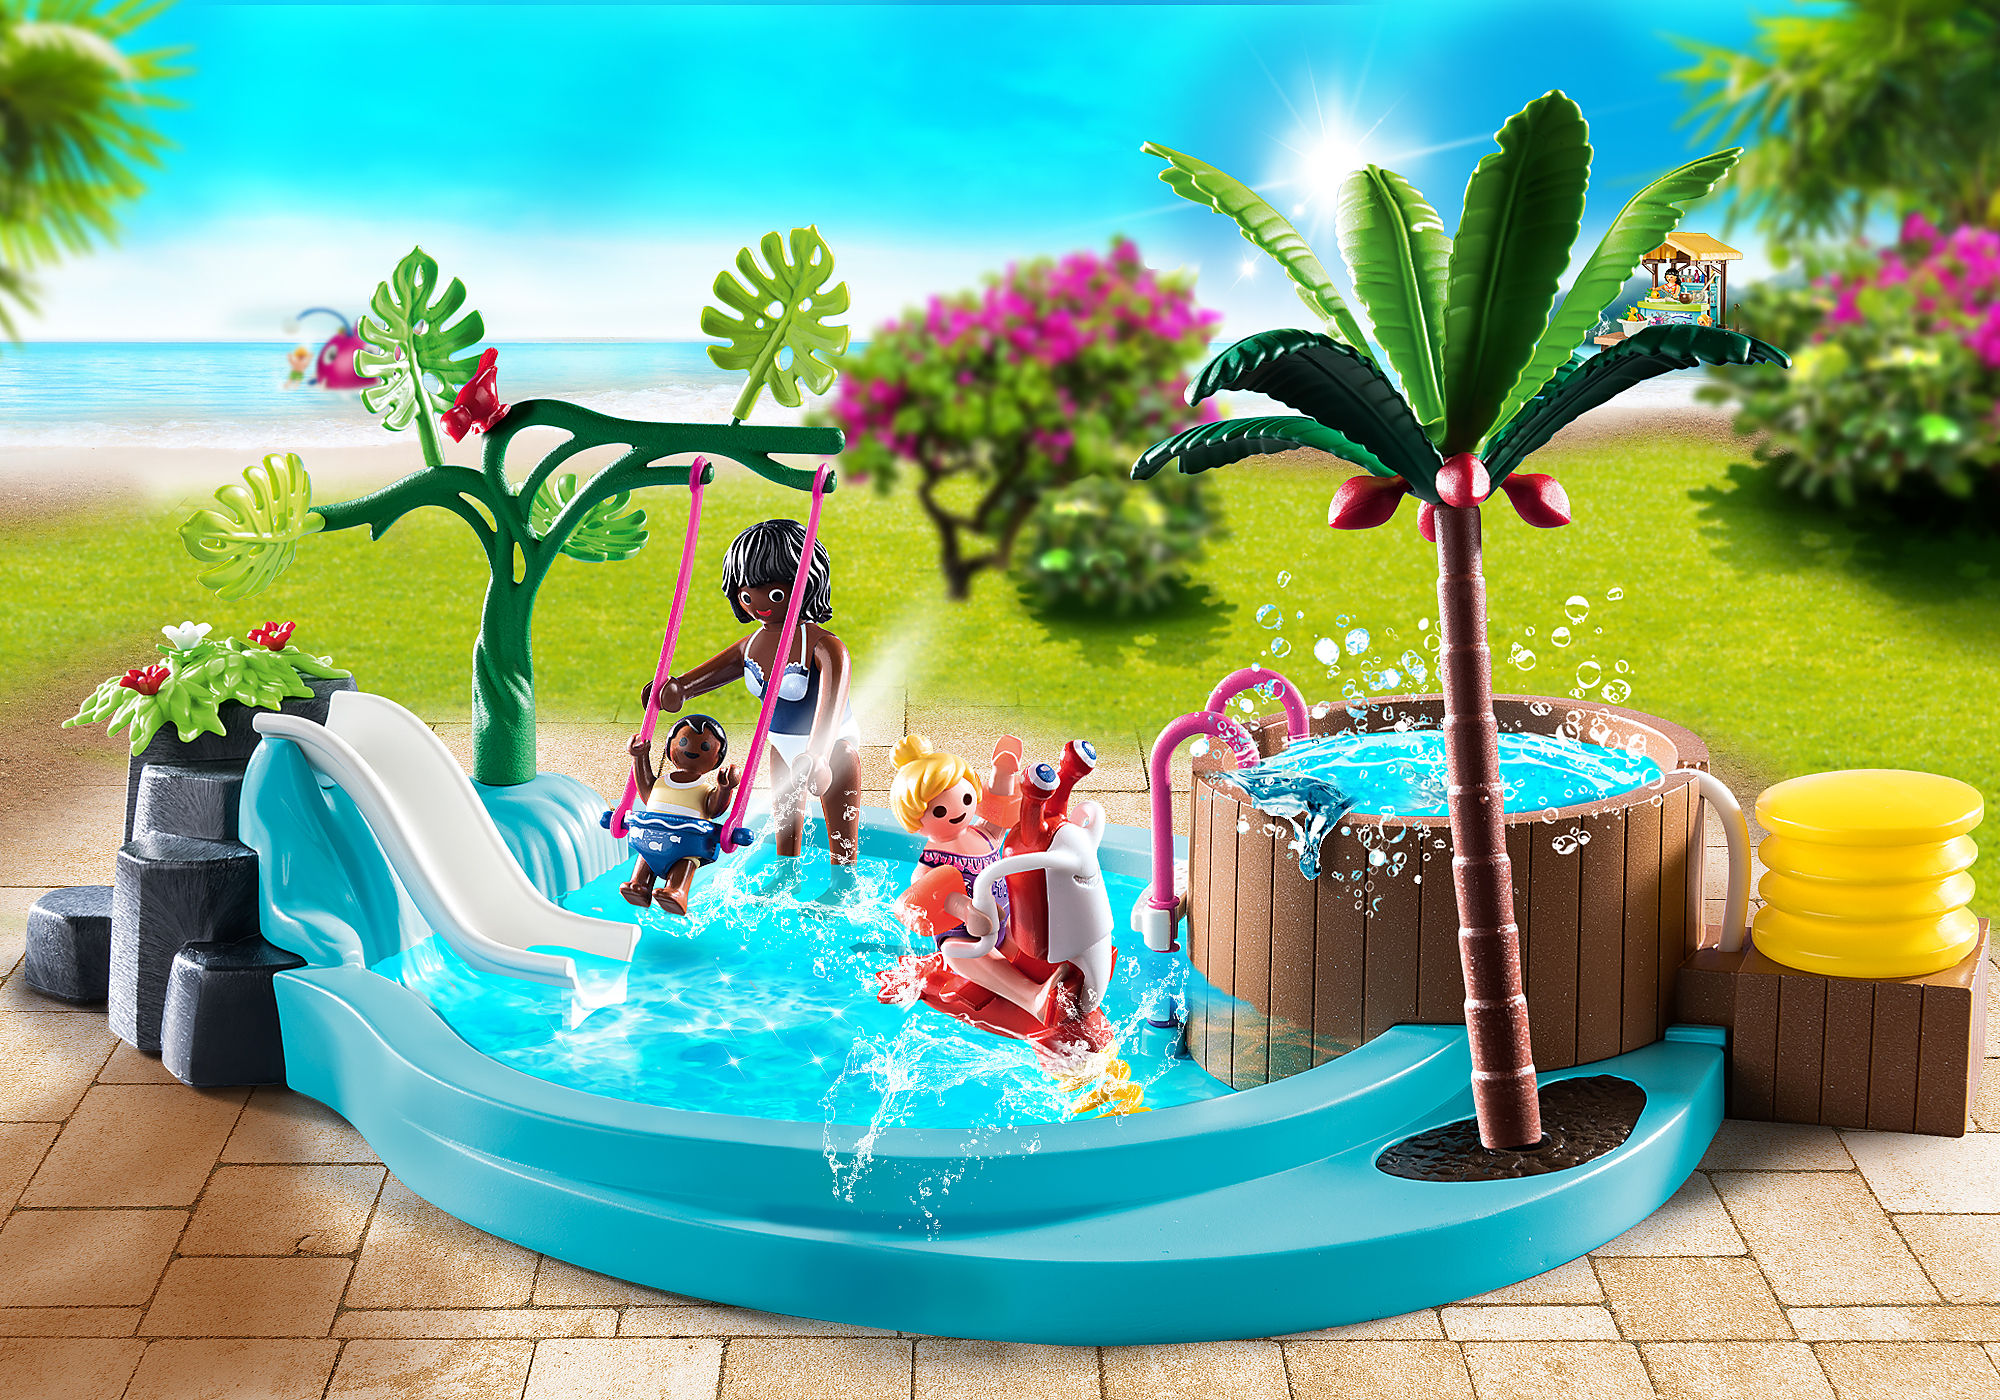 Children's Pool with Slide - 70611